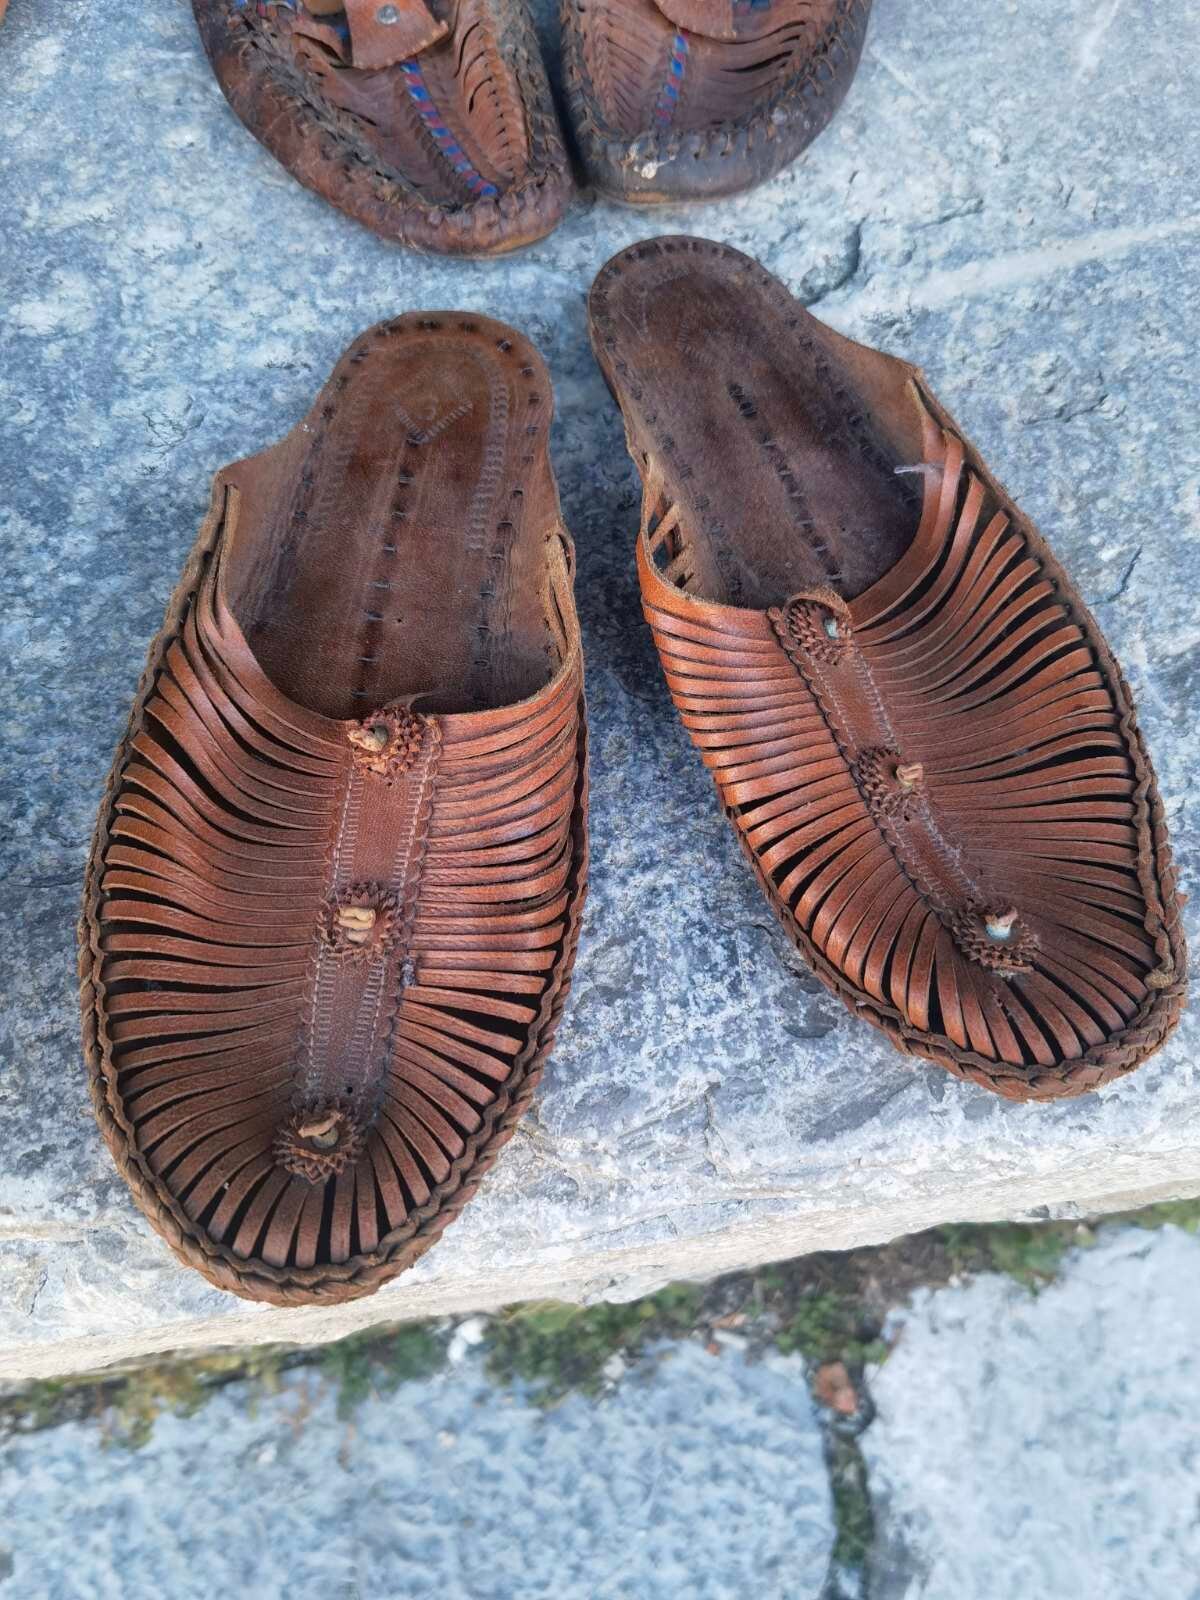 Lot of Four Handmade Leather Folklore Shoes, Antique and Primitive Leather  Shoes -  Norway